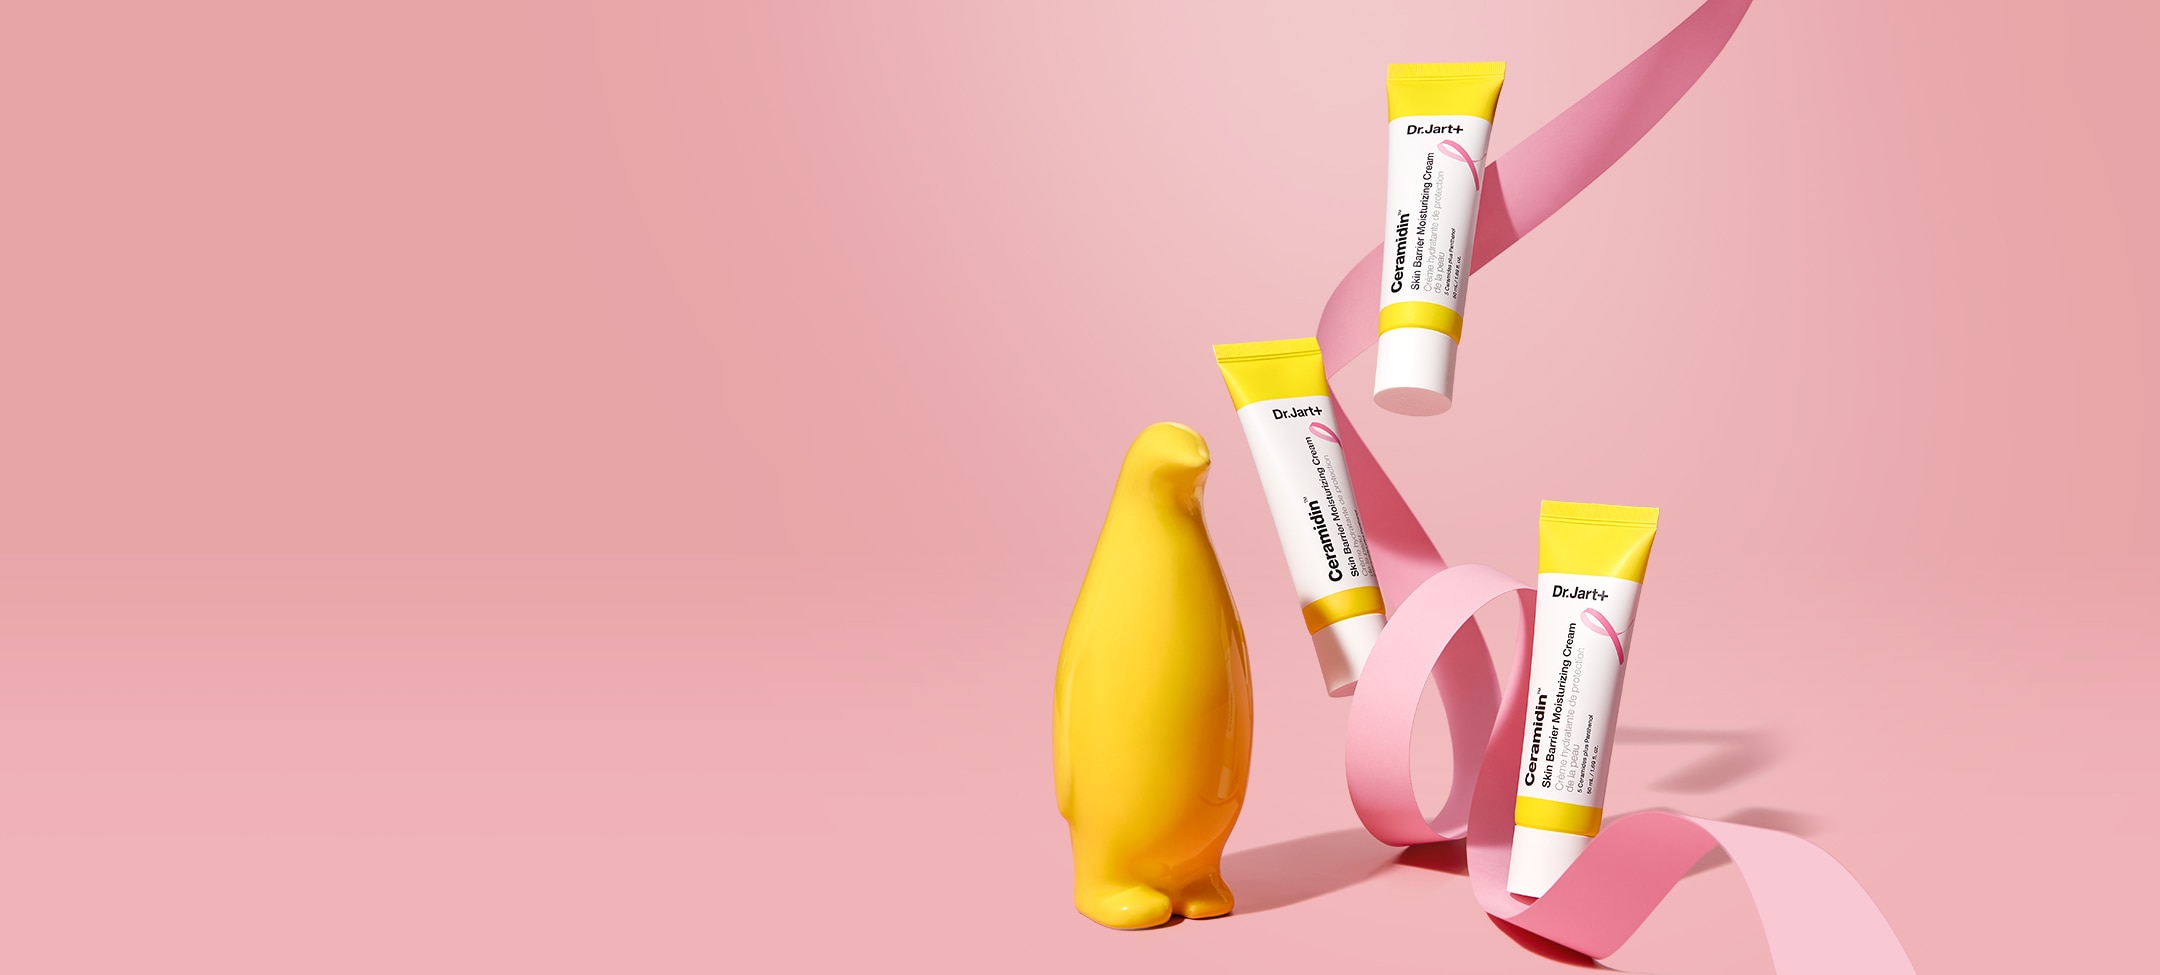 Penguin and artistically displayed pink breast cancer awareness ribbons among tube of ceramidin cream.